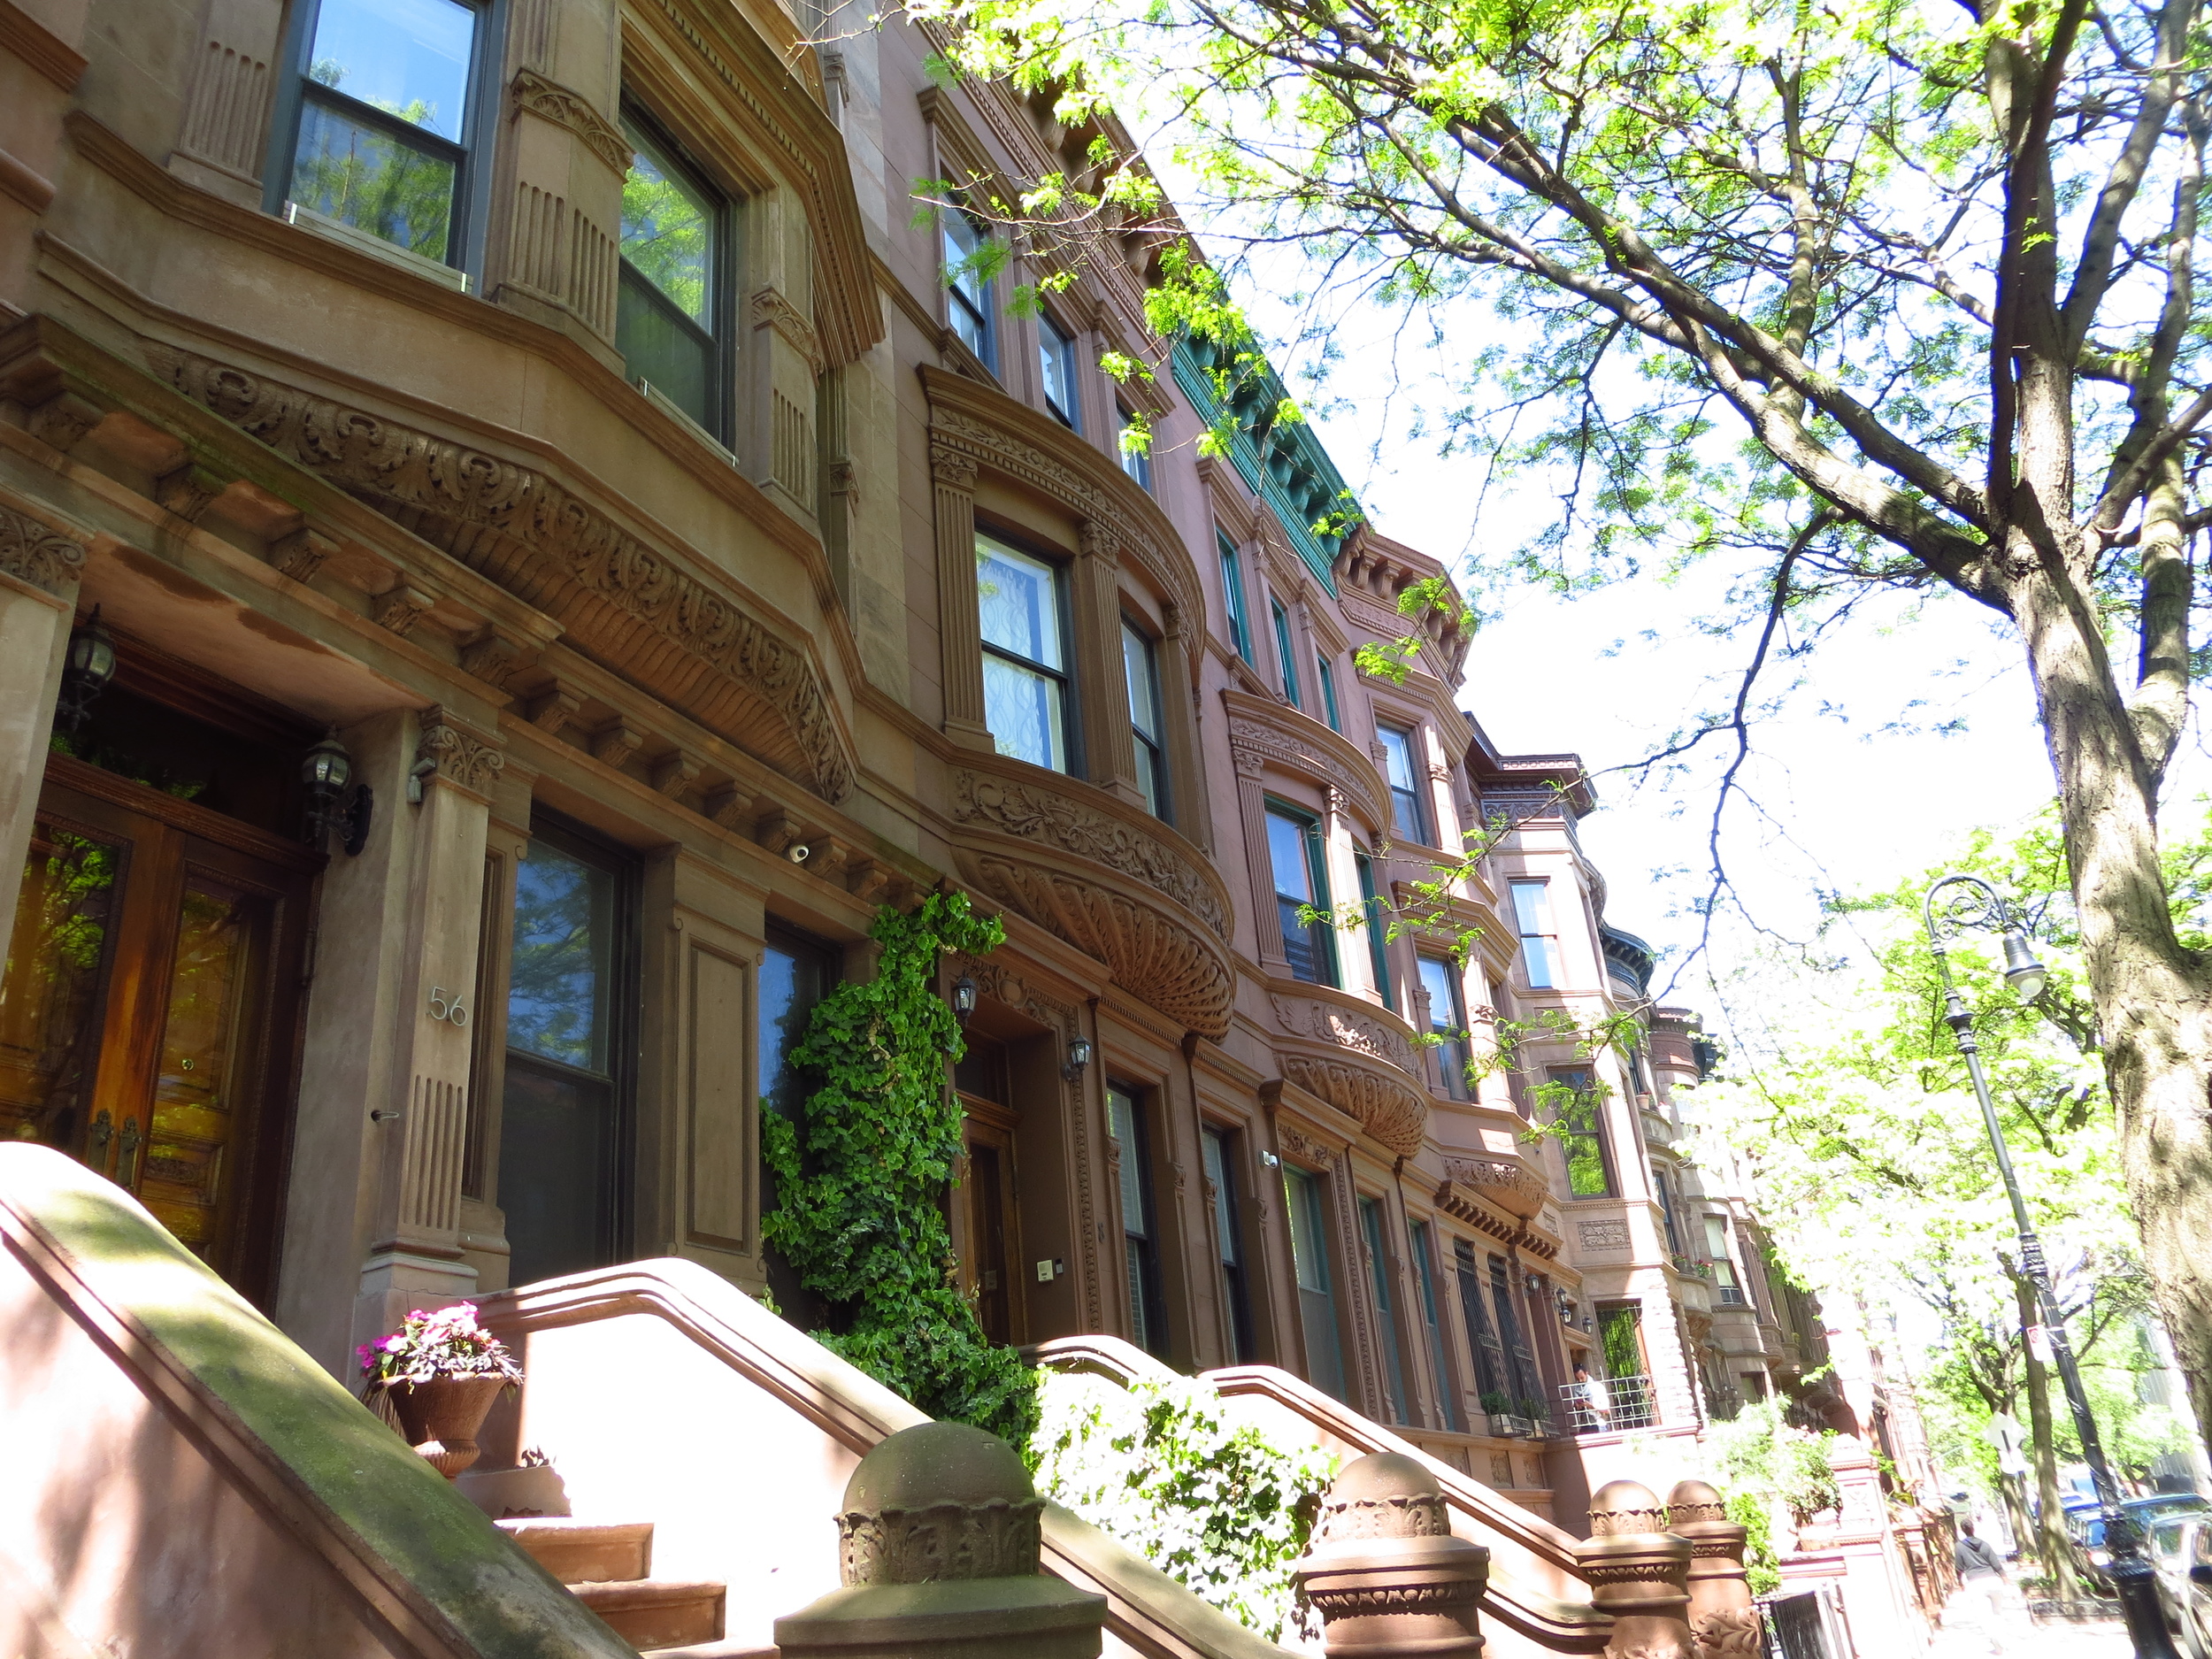 Again, with the brownstones